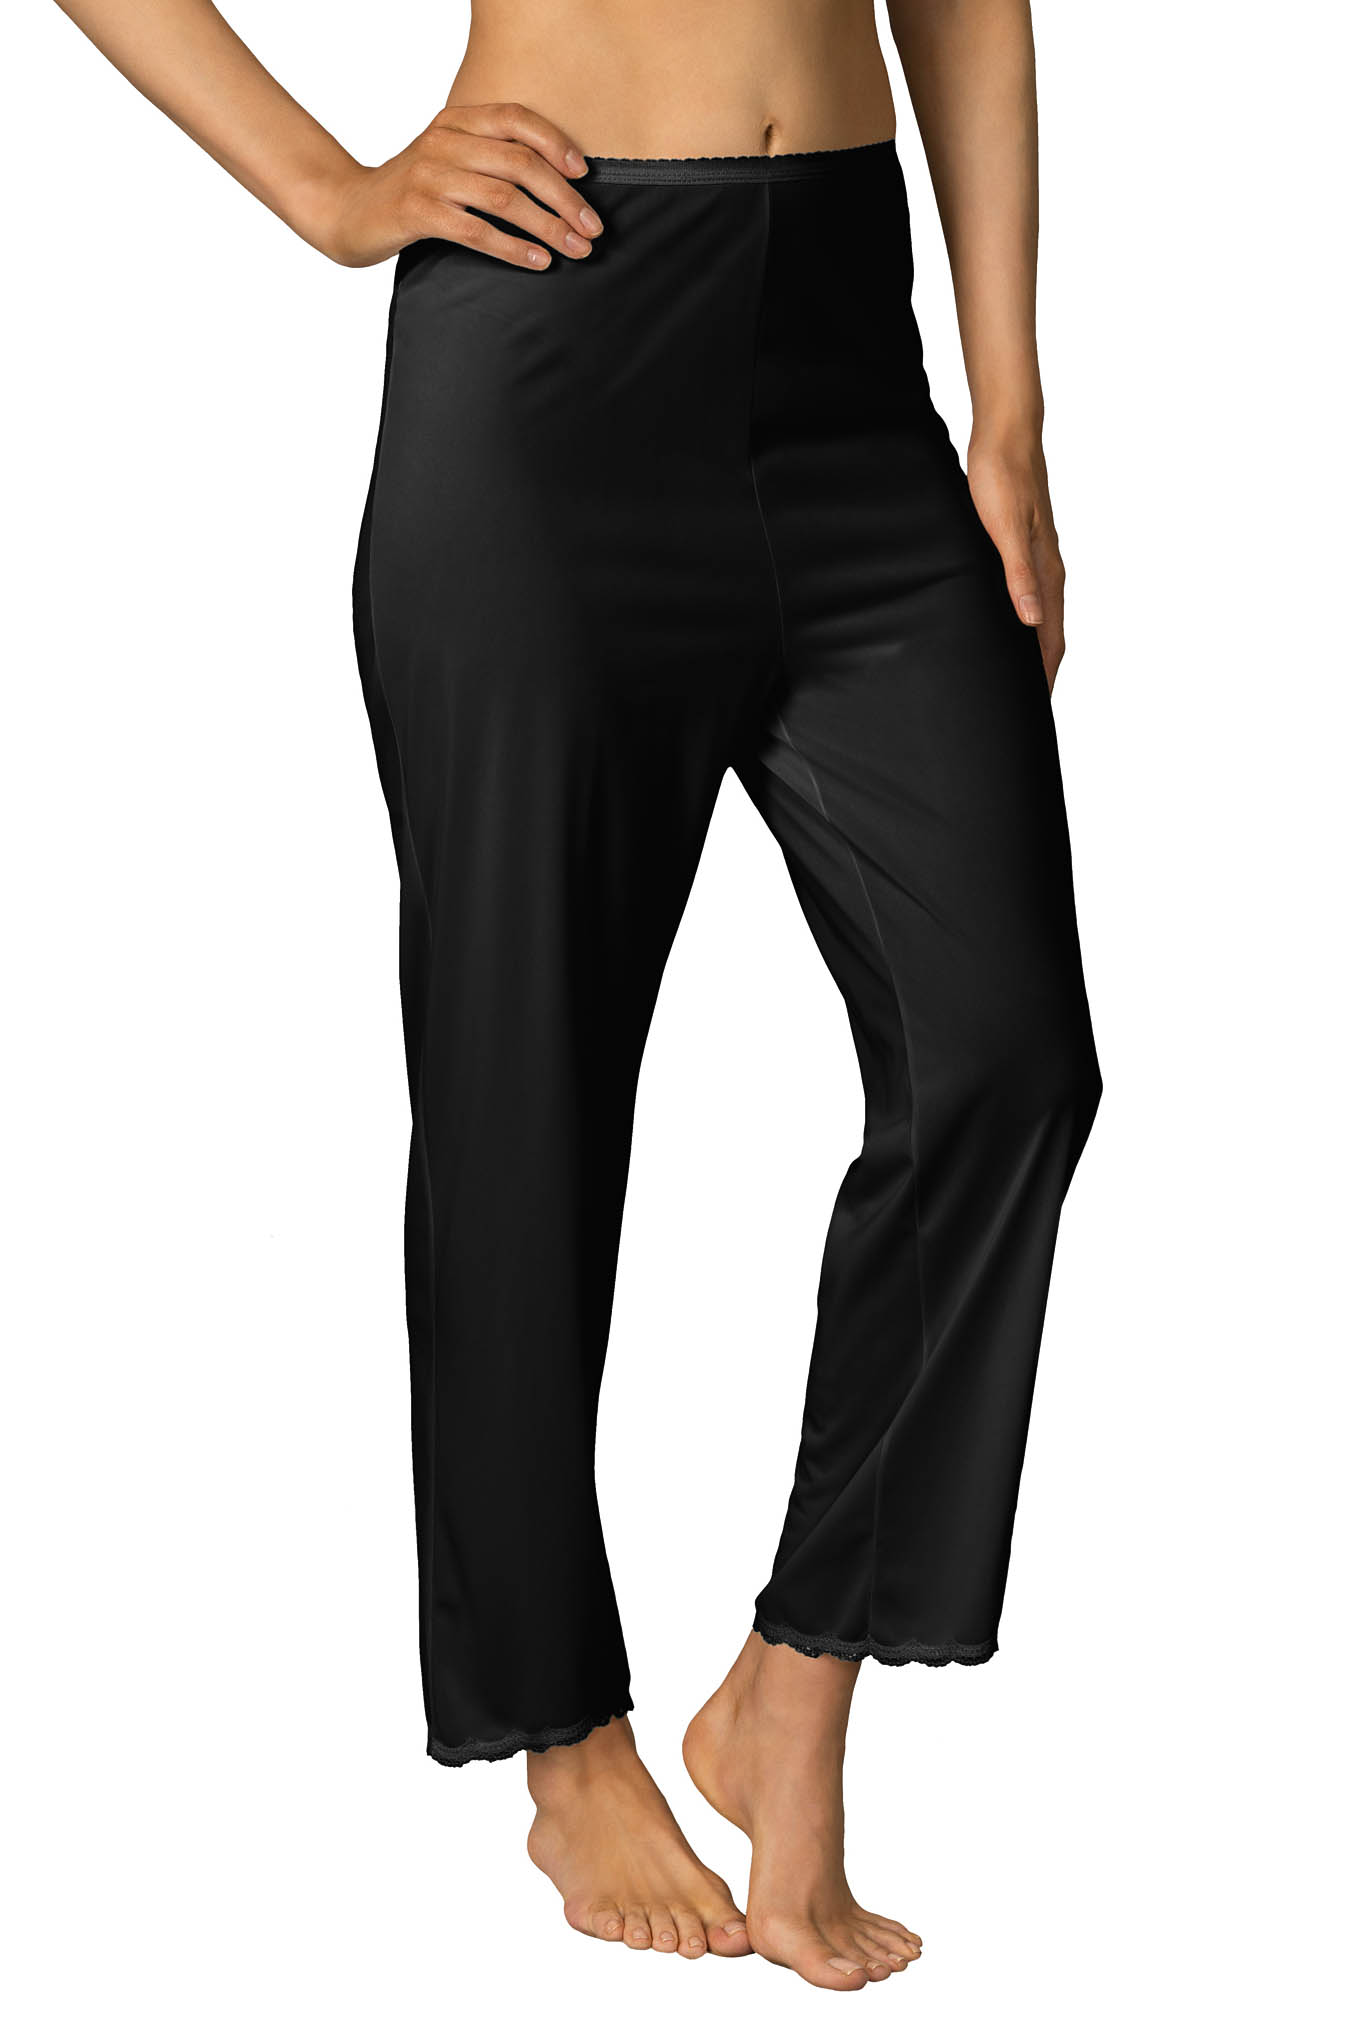 Women's Pettipants, Pant Liners